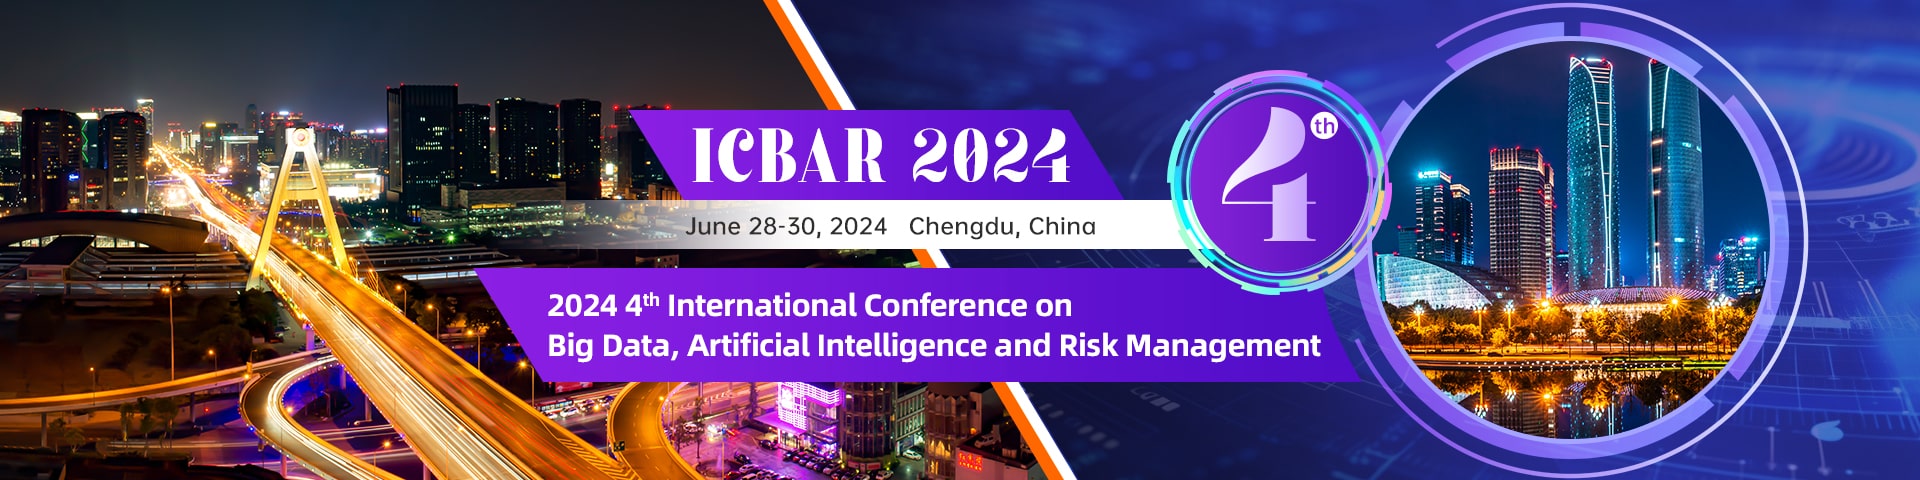 2024 4th International Conference on Big Data, Artificial Intelligence and Risk Management (ICBAR 2024)